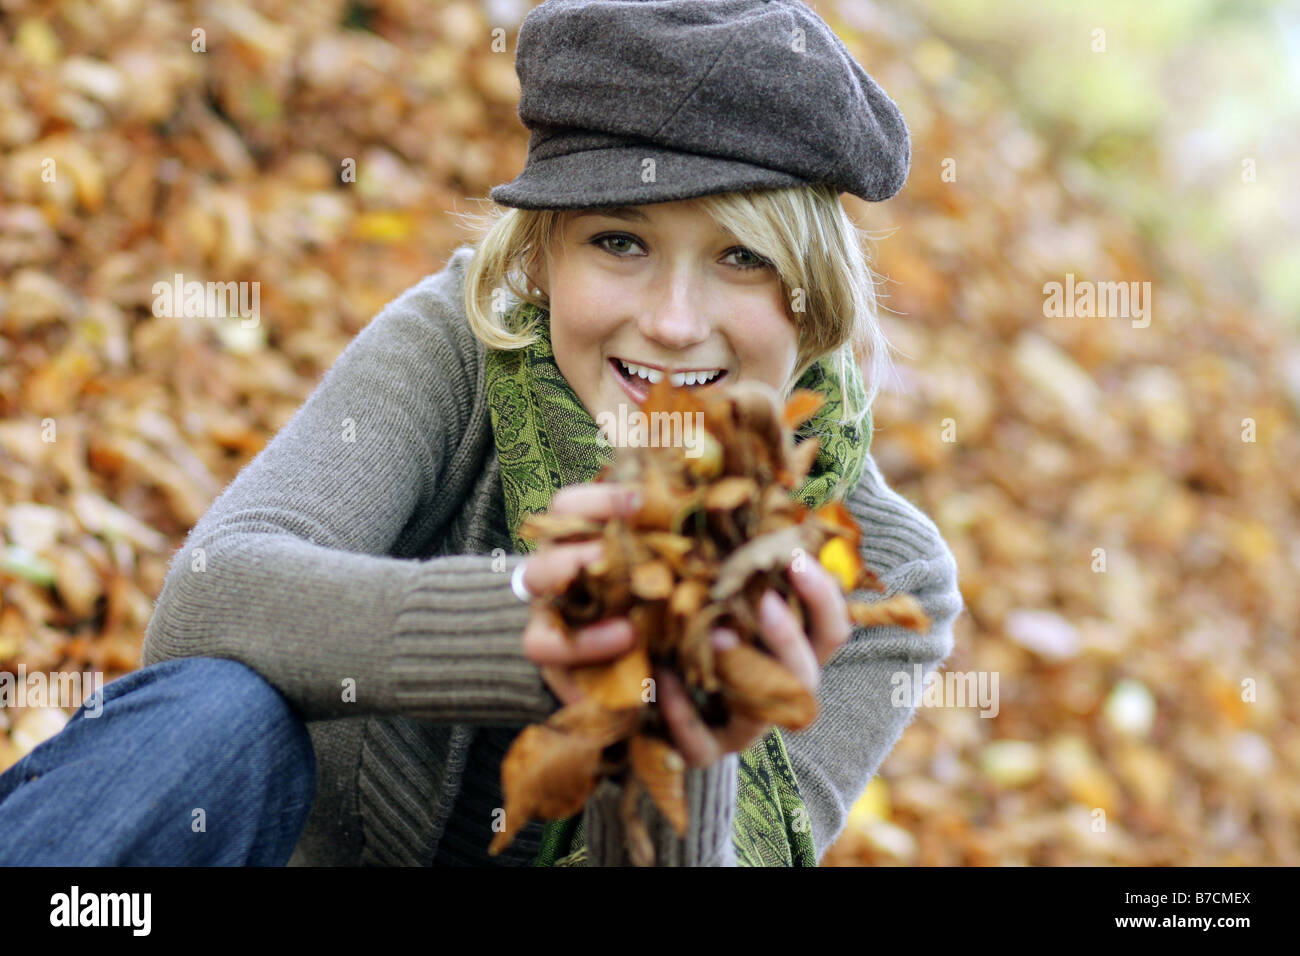 young blond woman enjoying a sunny autumn day, playing with autumn foliage, Germany Stock Photo